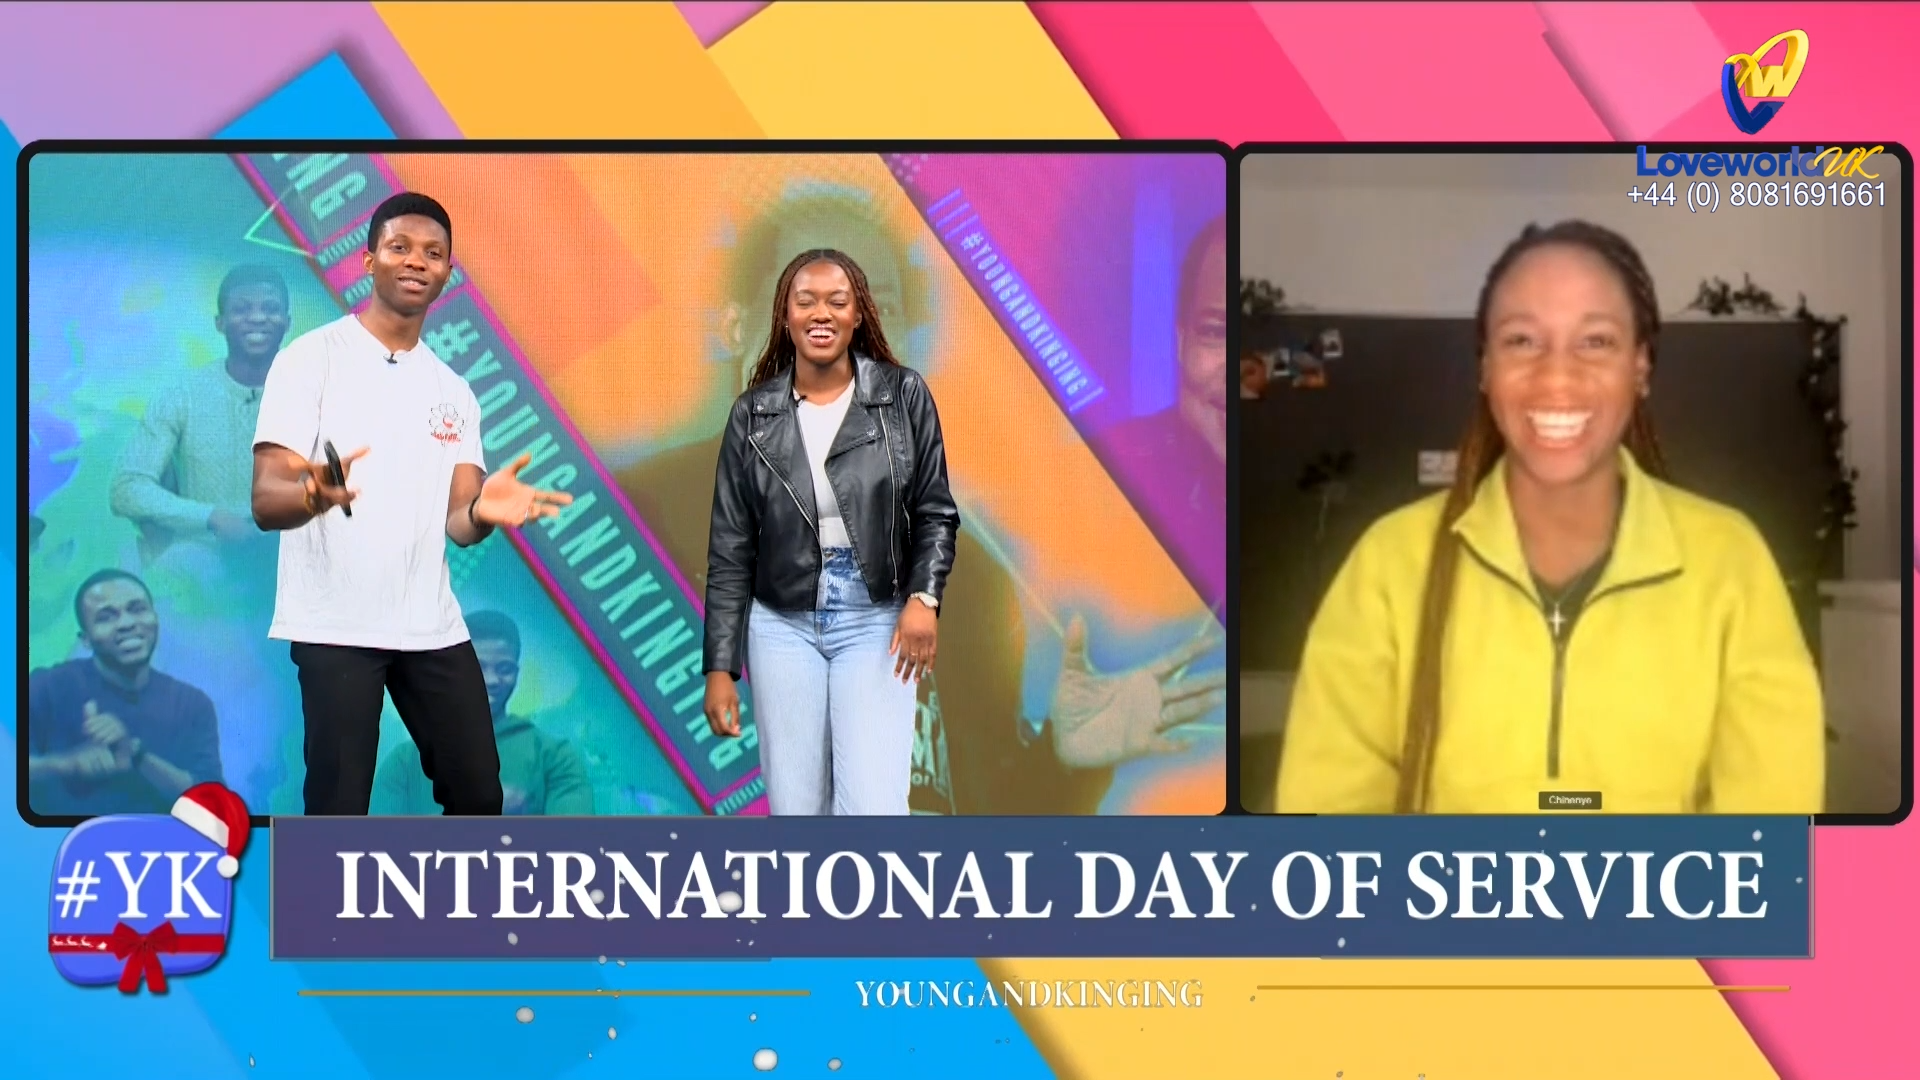 EPISODE 1 - INTERNATIONAL DAY OF SERVICE | WHAT TO WATCH THIS WEEK